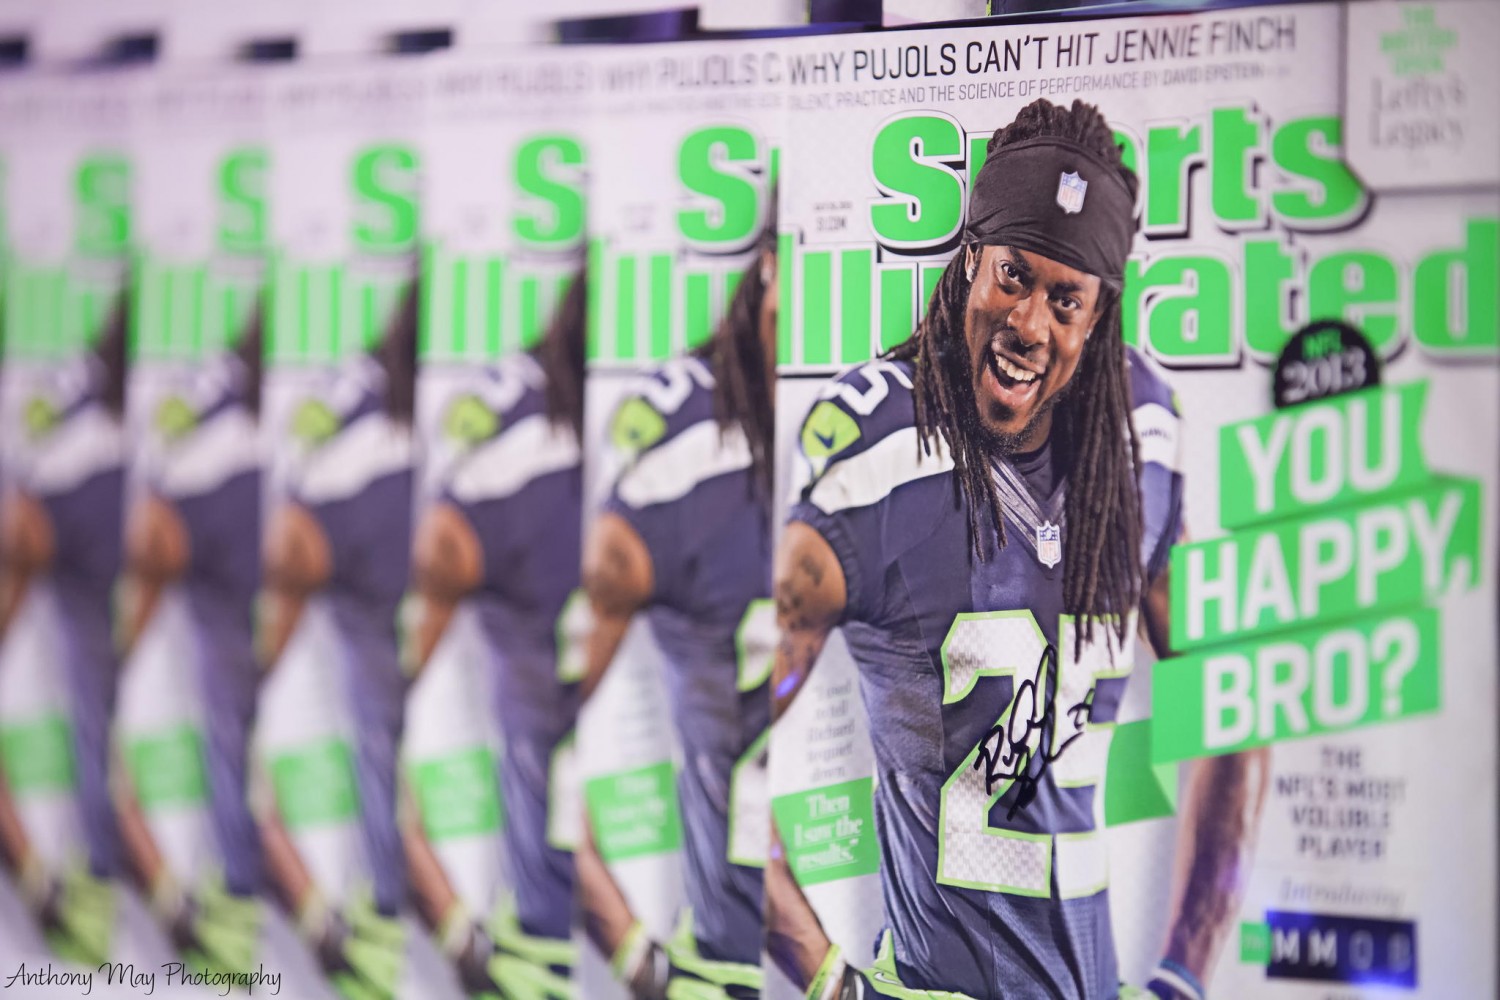 News Roundup: Sports Illustrated Fires All Its Staff Photographers, World's Largest Stop-Motion GIF, and More